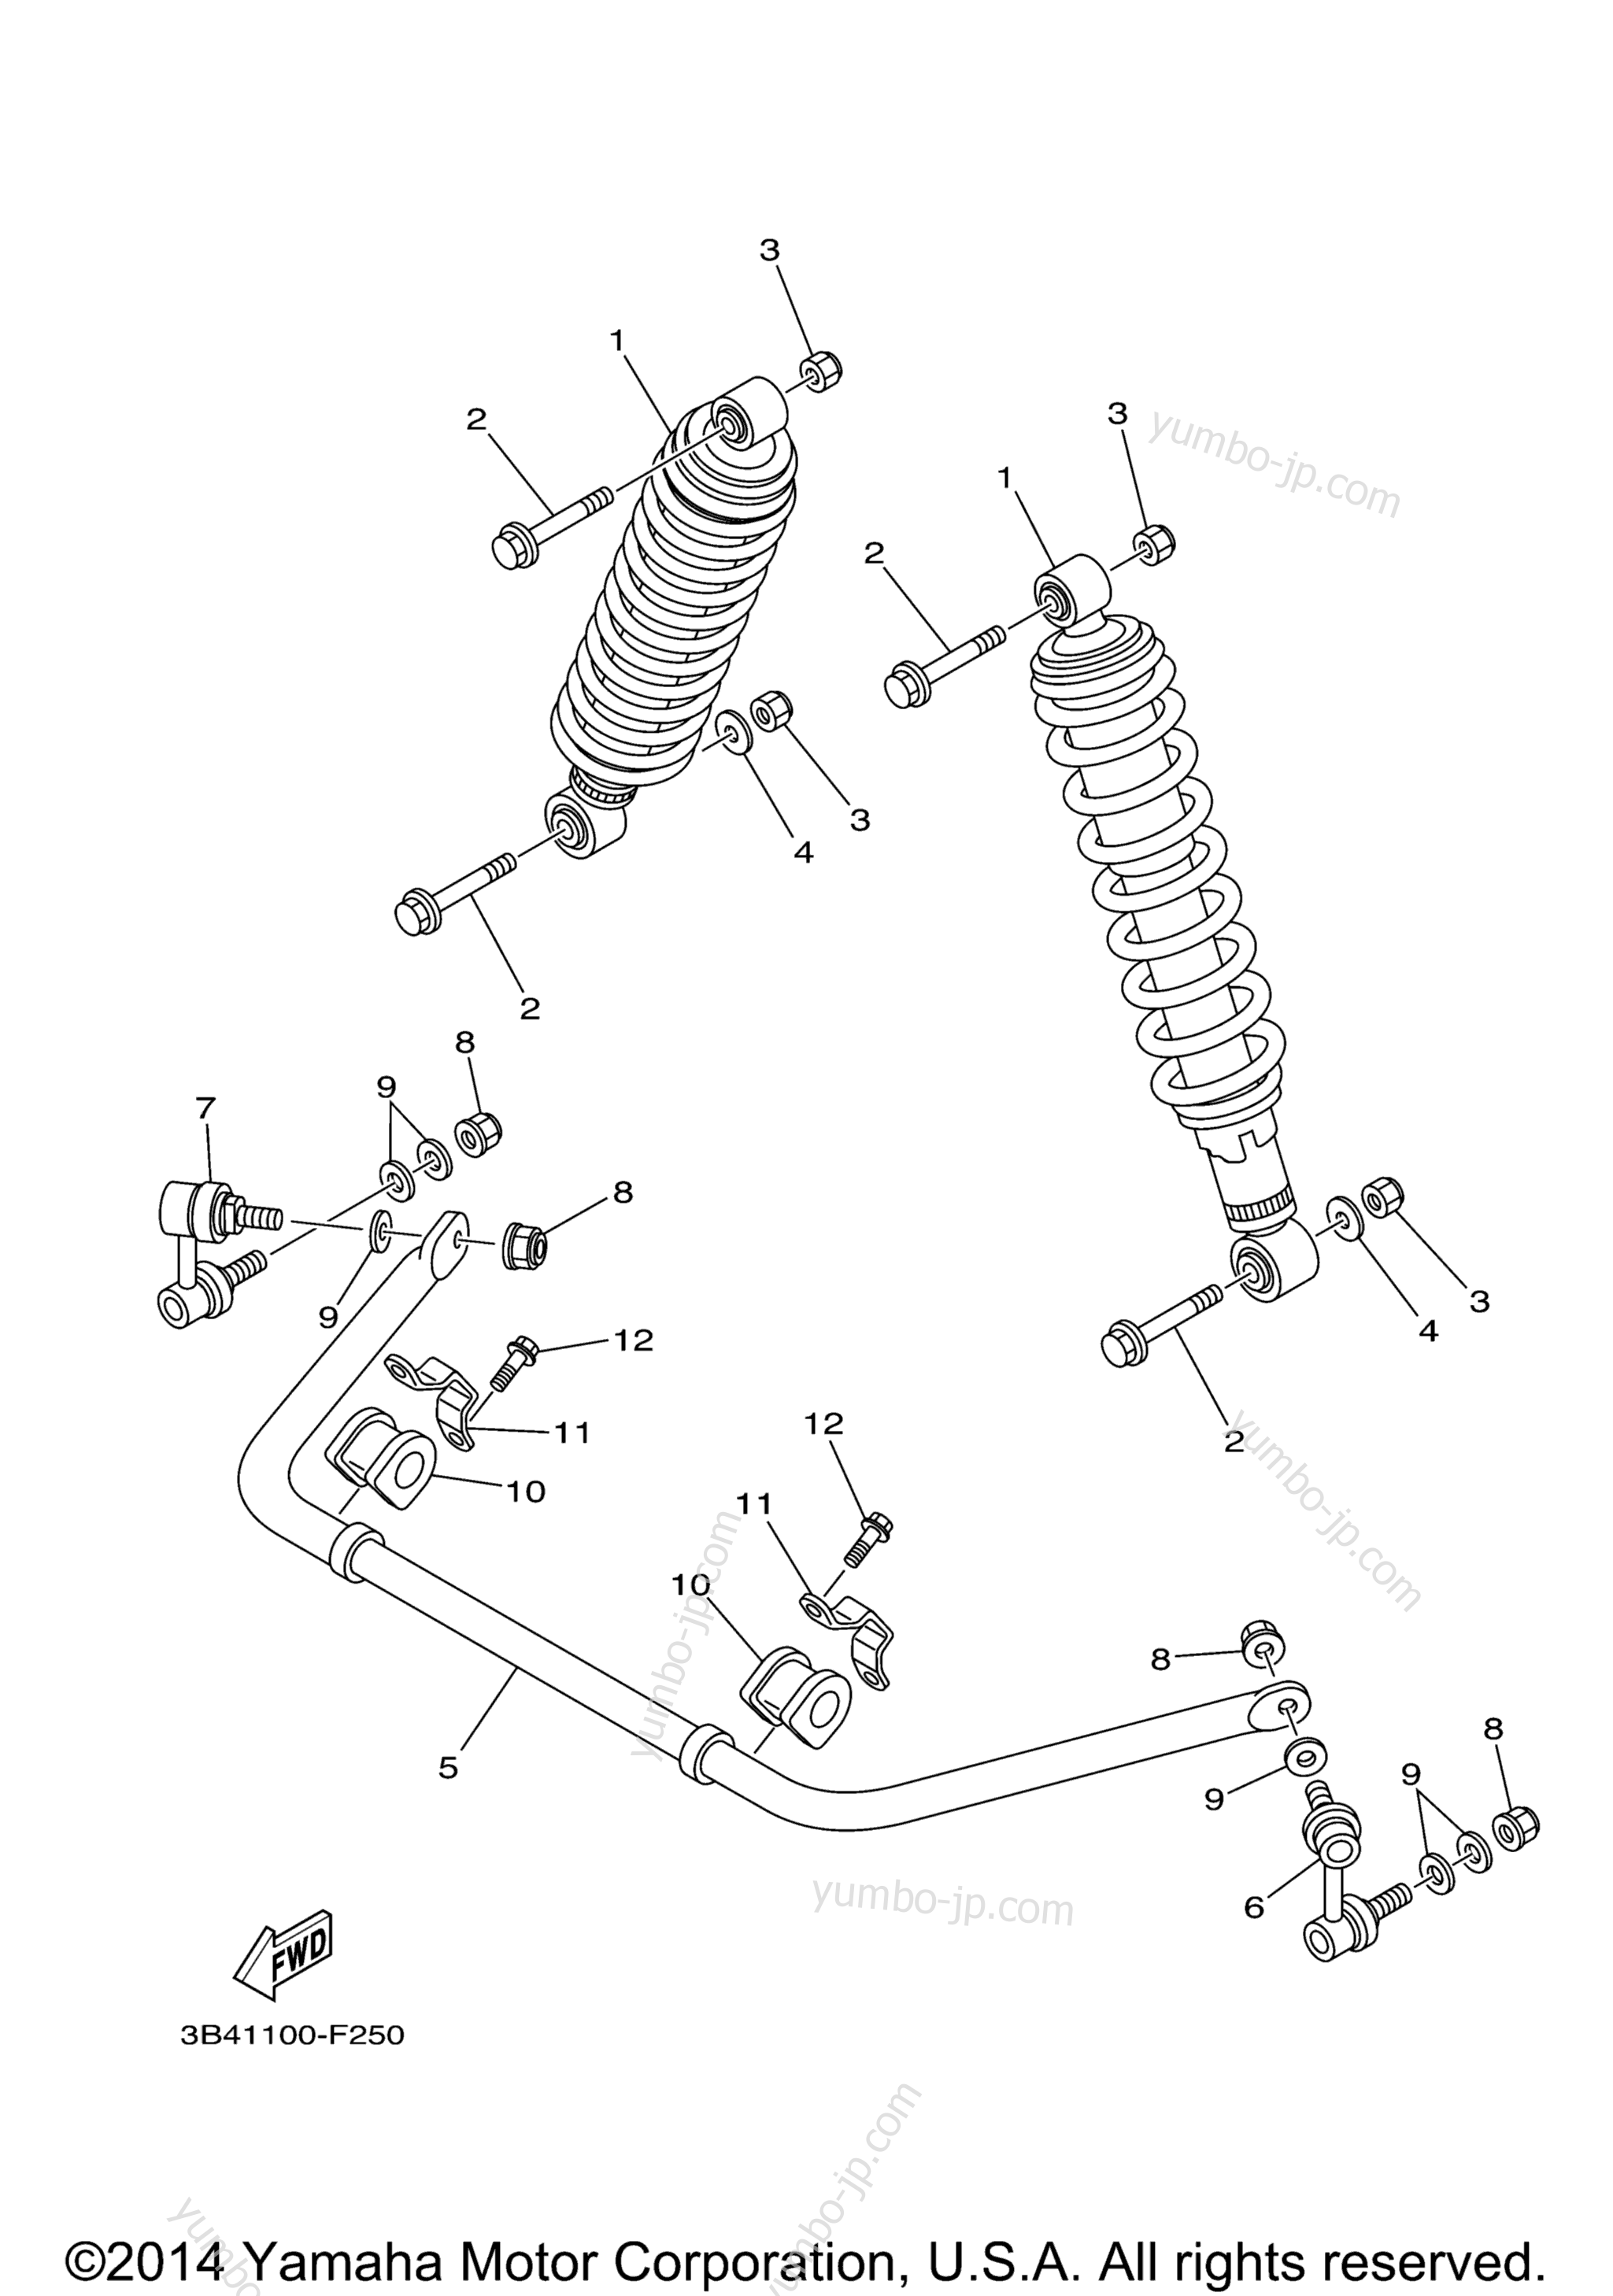 Rear Suspension for ATVs YAMAHA GRIZZLY 700 FI 4WD (YFM7FGZGR) 2010 year